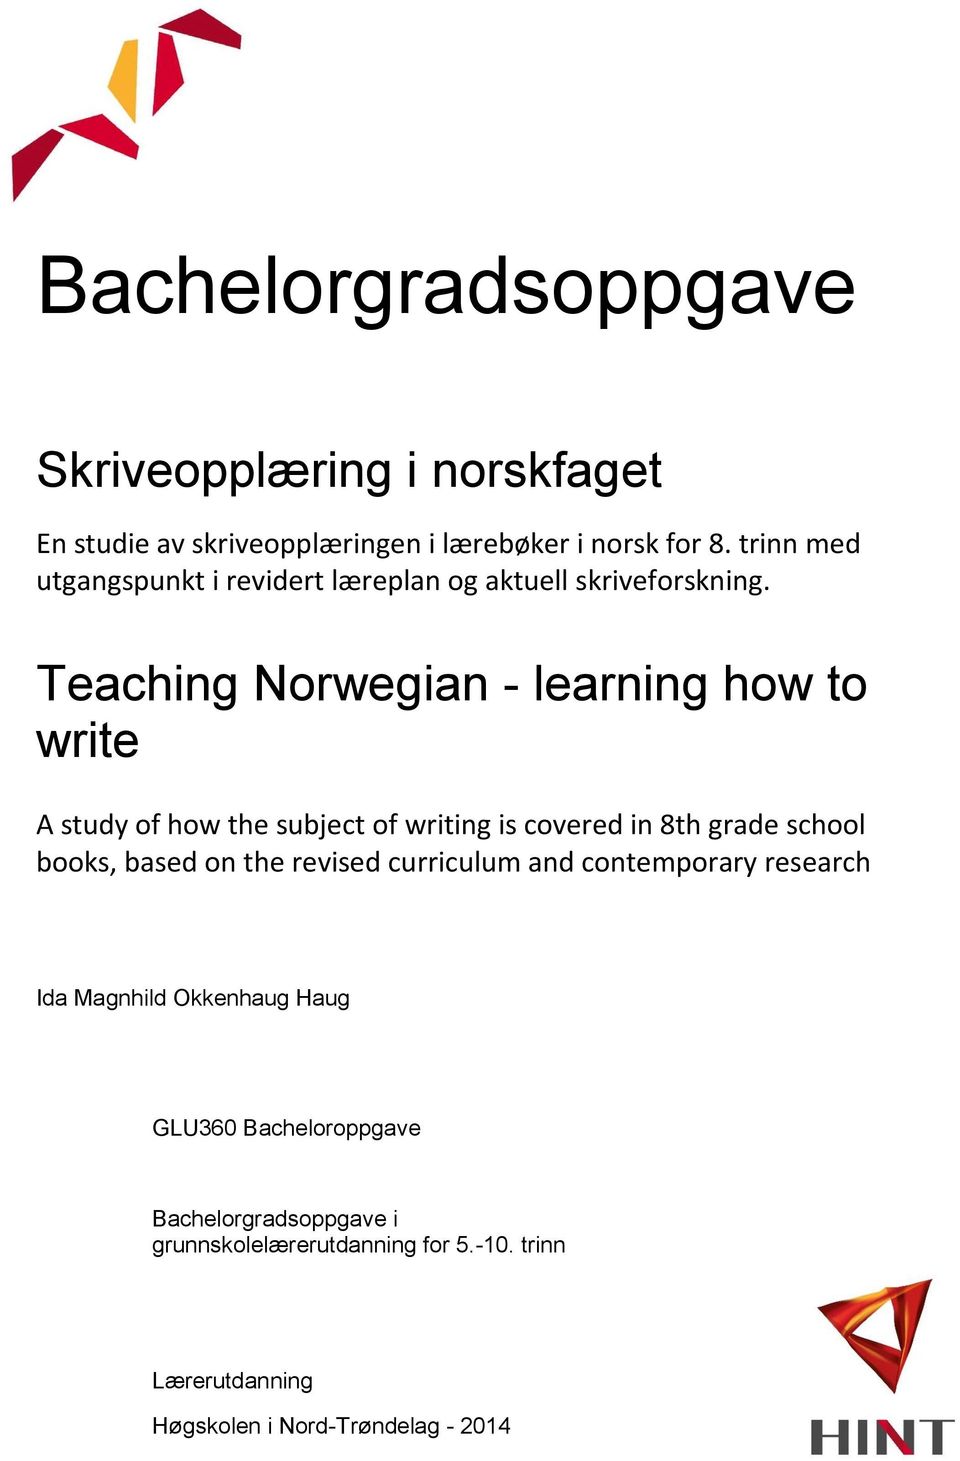 Teaching Norwegian - learning how to write A study of how the subject of writing is covered in 8th grade school books, based on